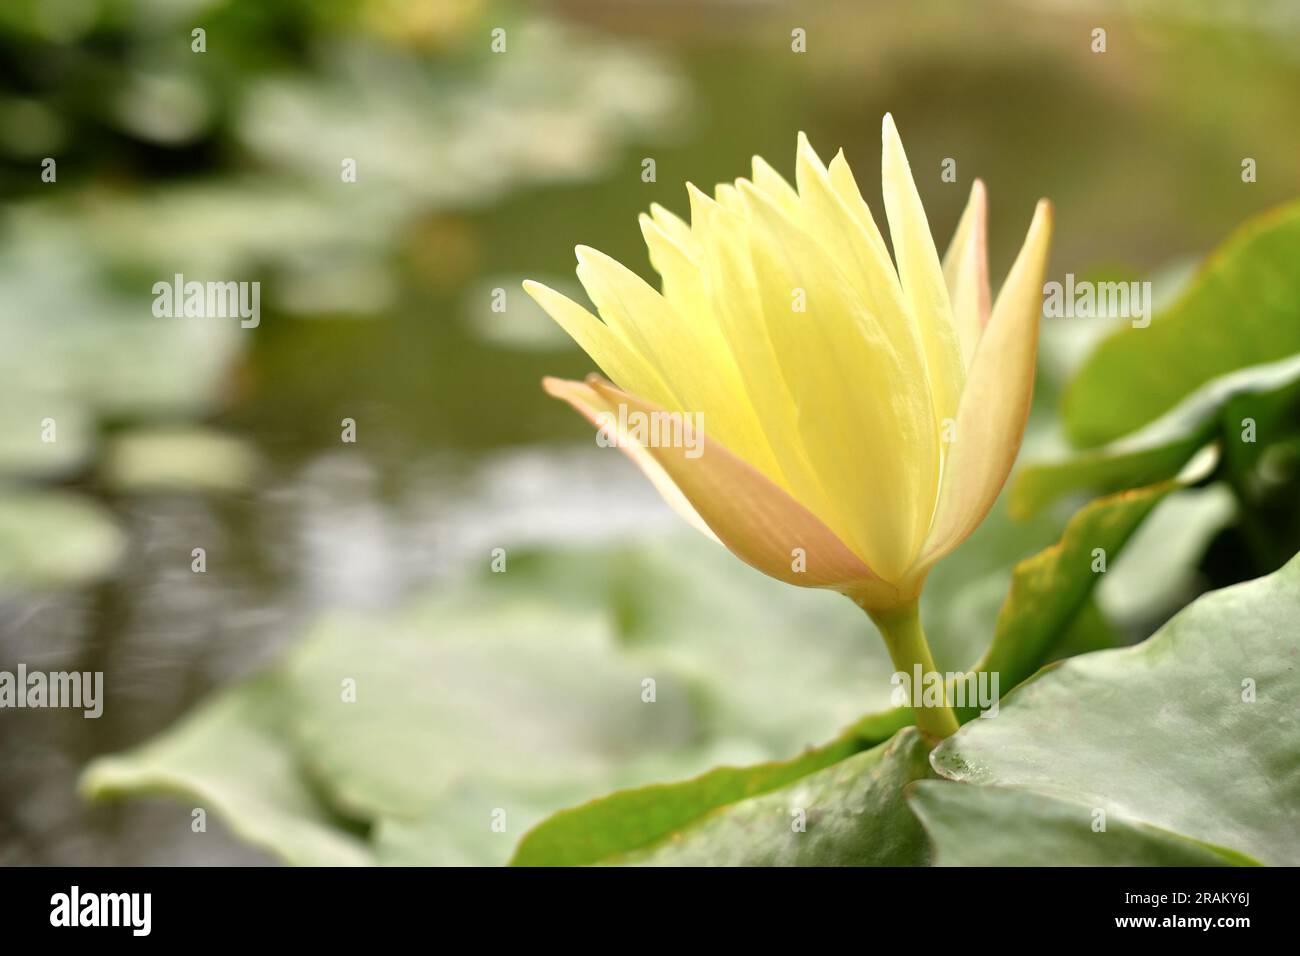 Pond with large yellow water lily flower. Stock Photo